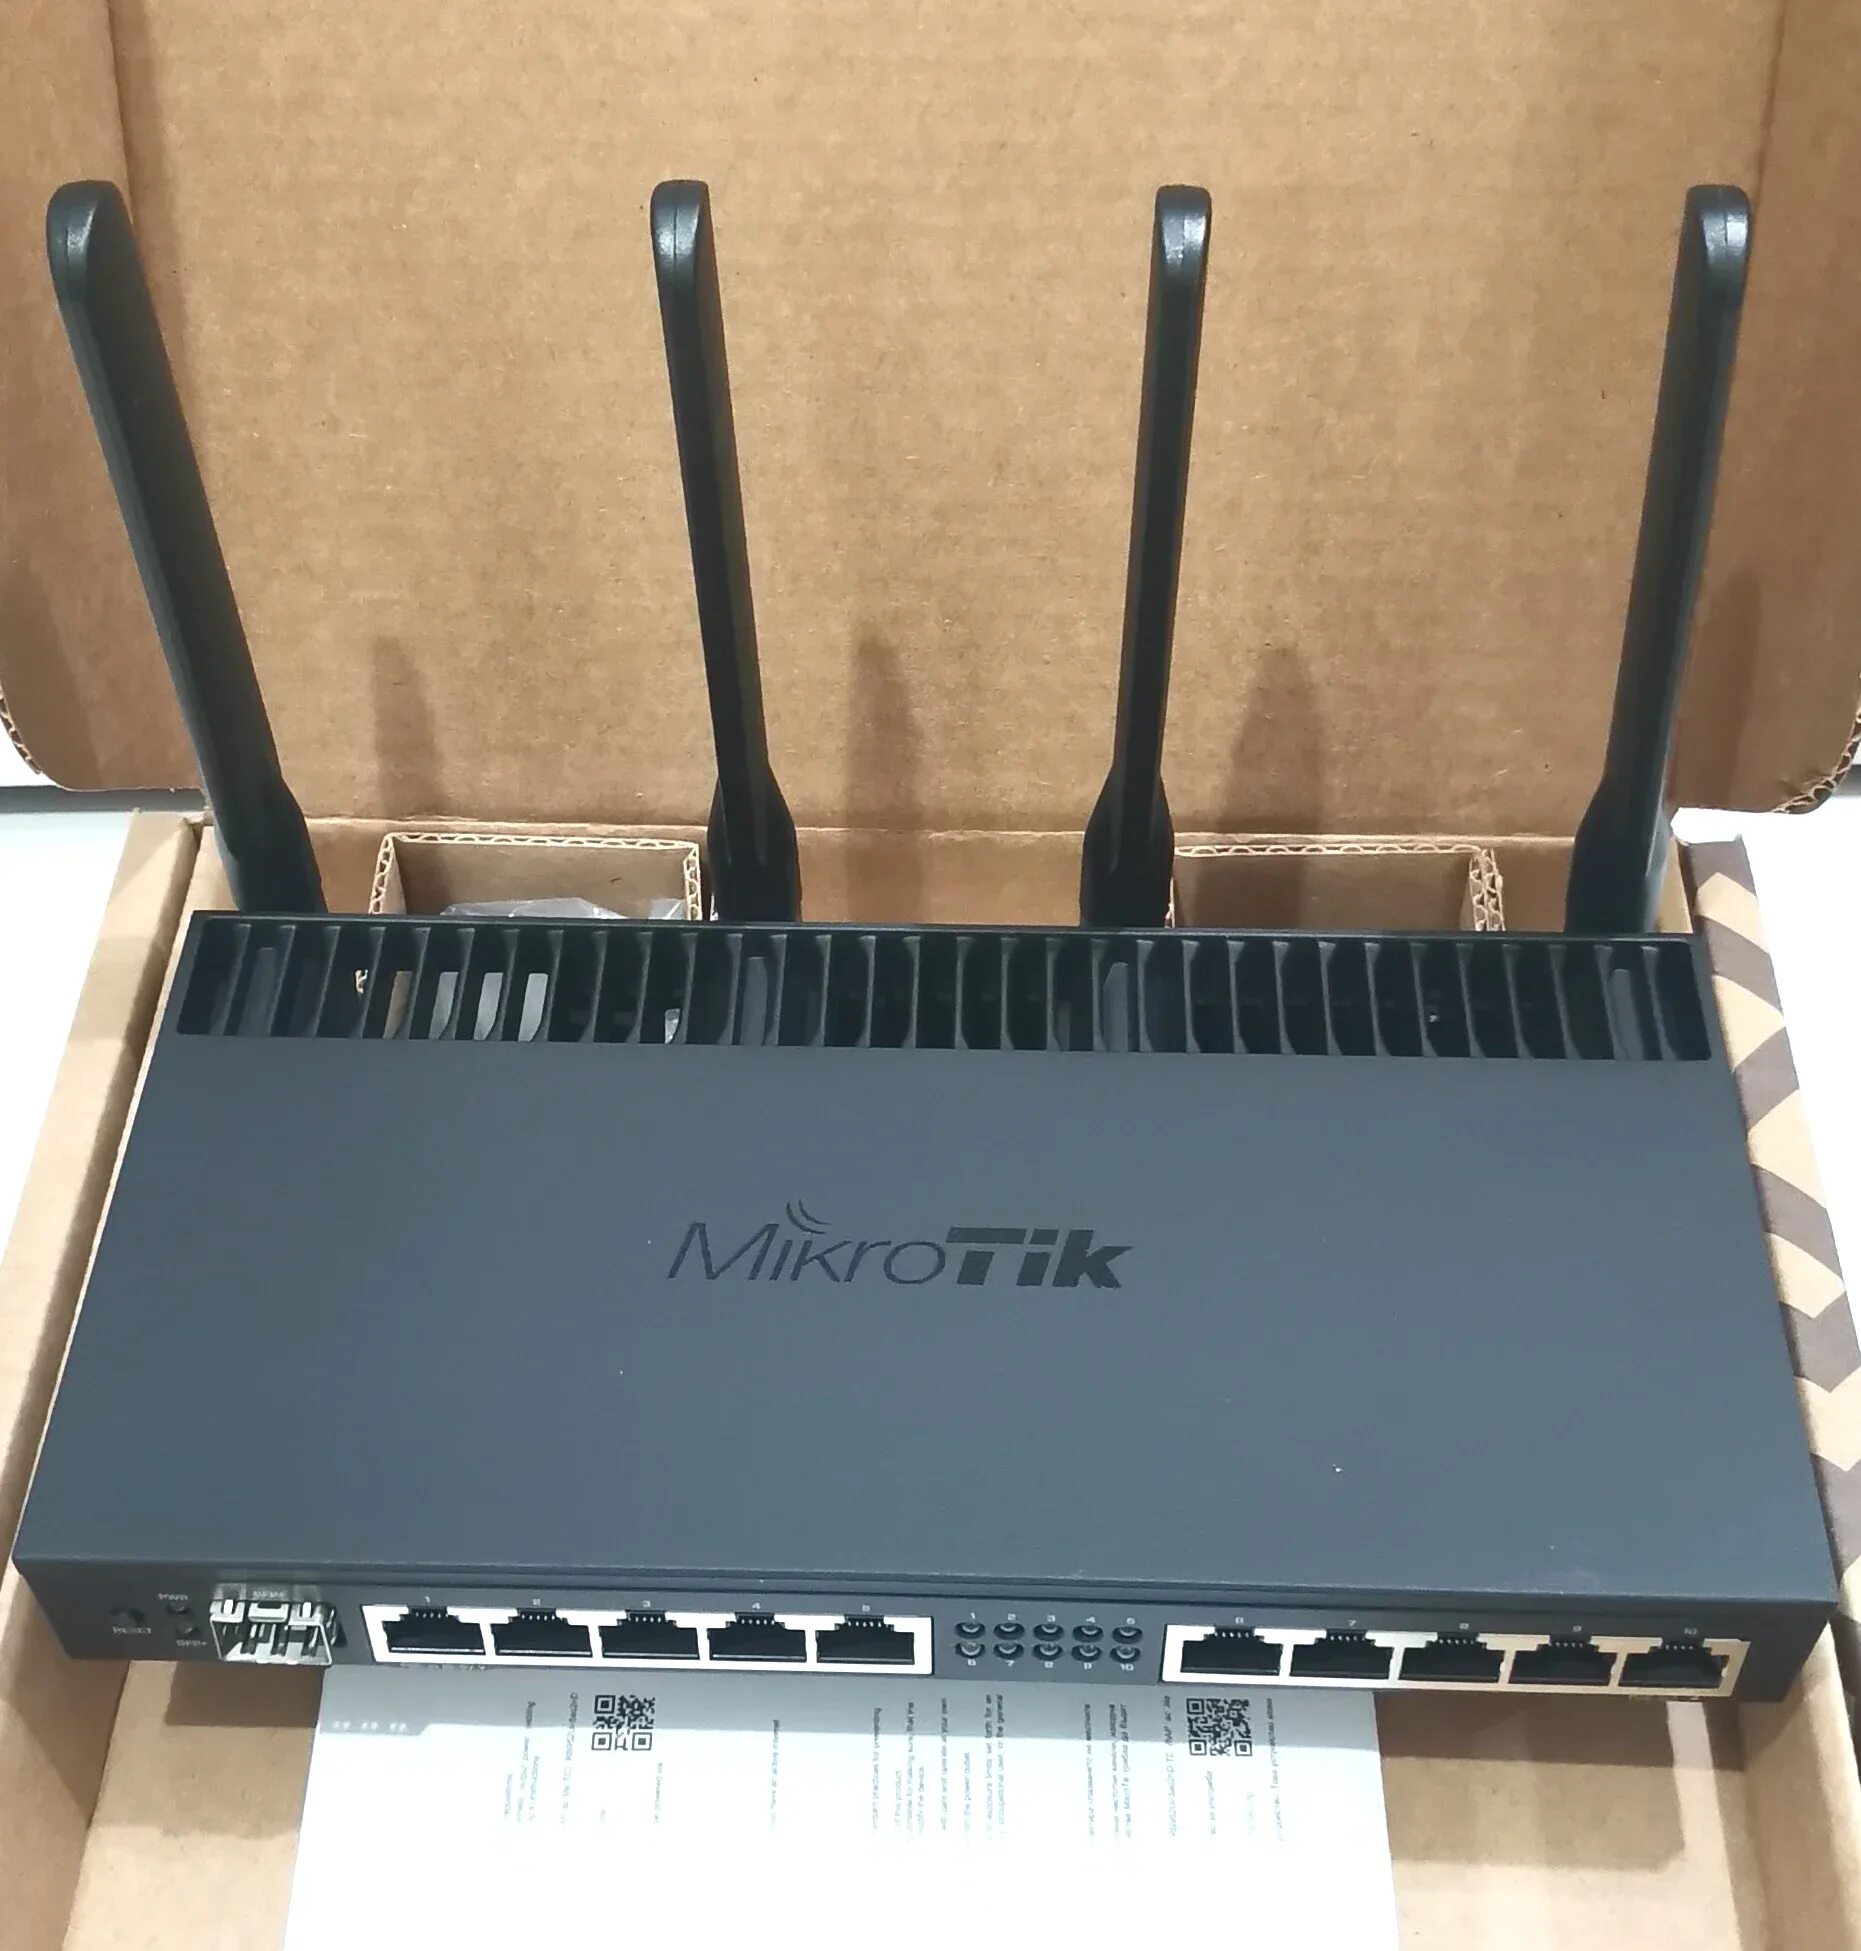 Rb4011igs 5hacq2hnd in. Mikrotik rb4011igs+5hacq2hnd-in. Роутер Mikrotik rb4011igs+5hacq2hnd-in. Mikrotik Wi-Fi rb4011igs+5hacq2hnd-in.